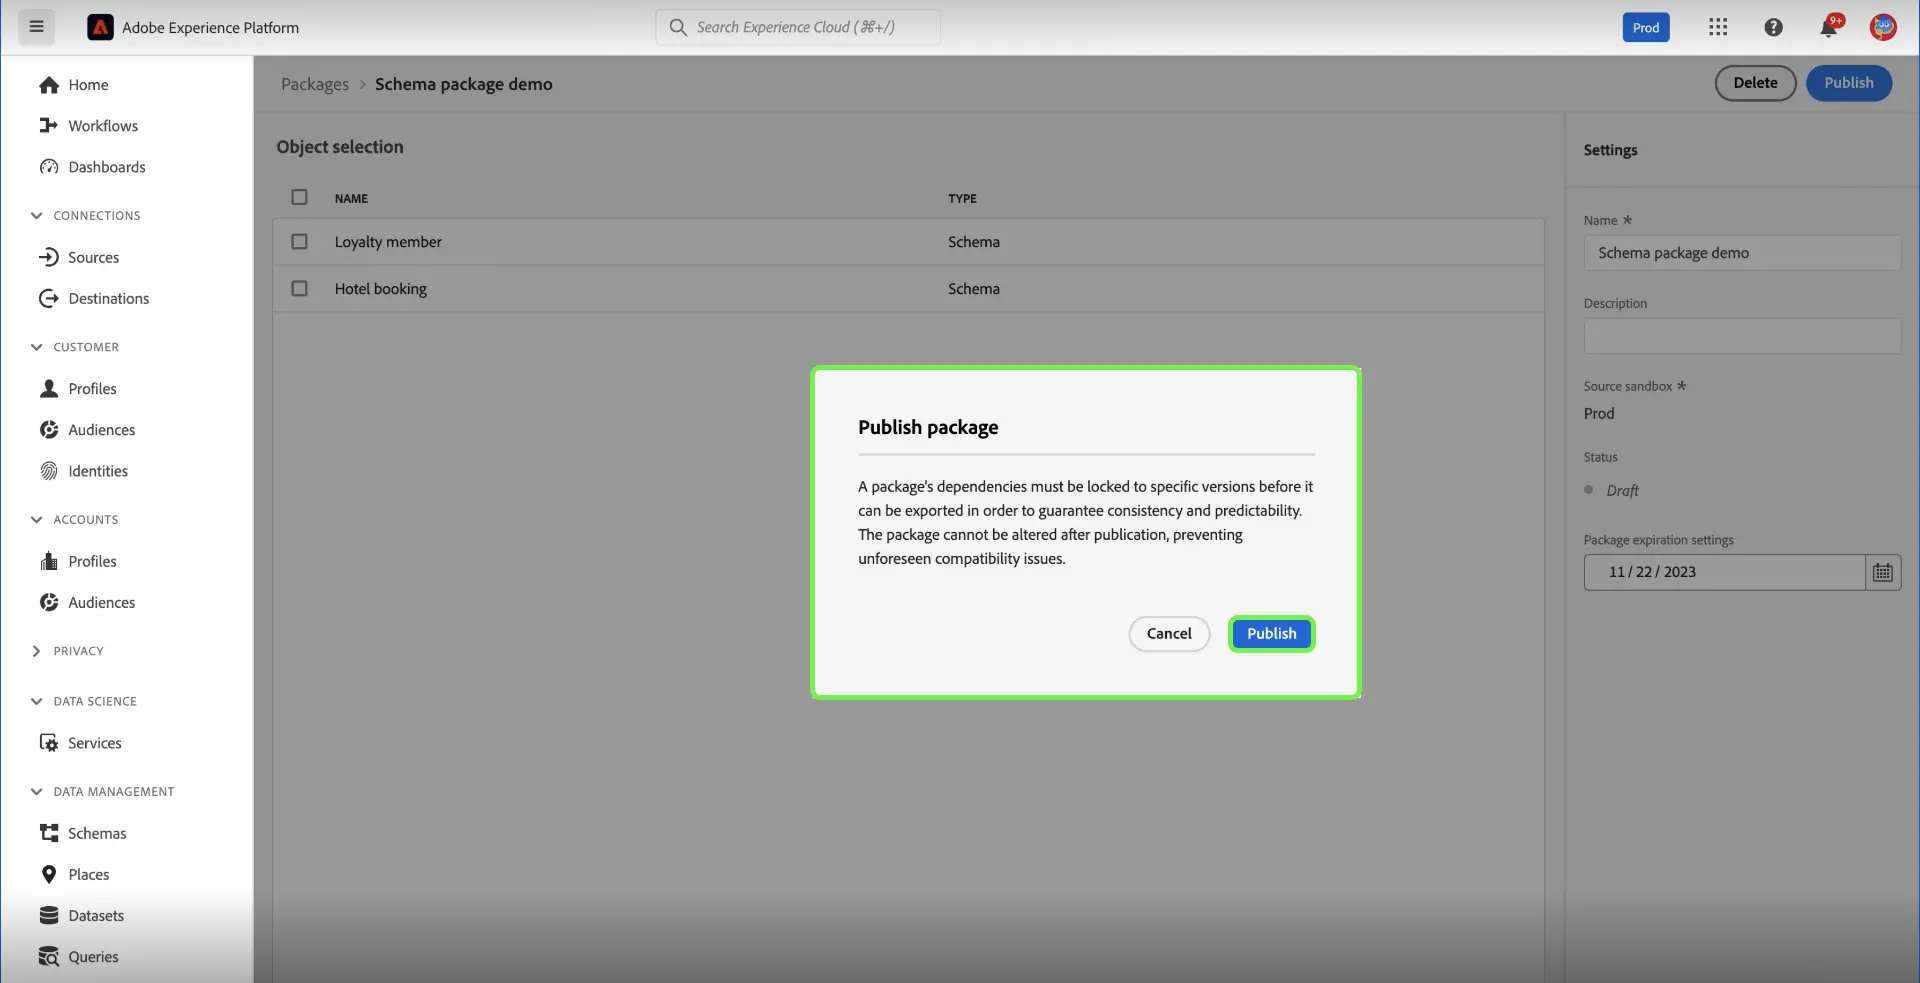 Publish package confirmation dialog, highlighting the Publish option.